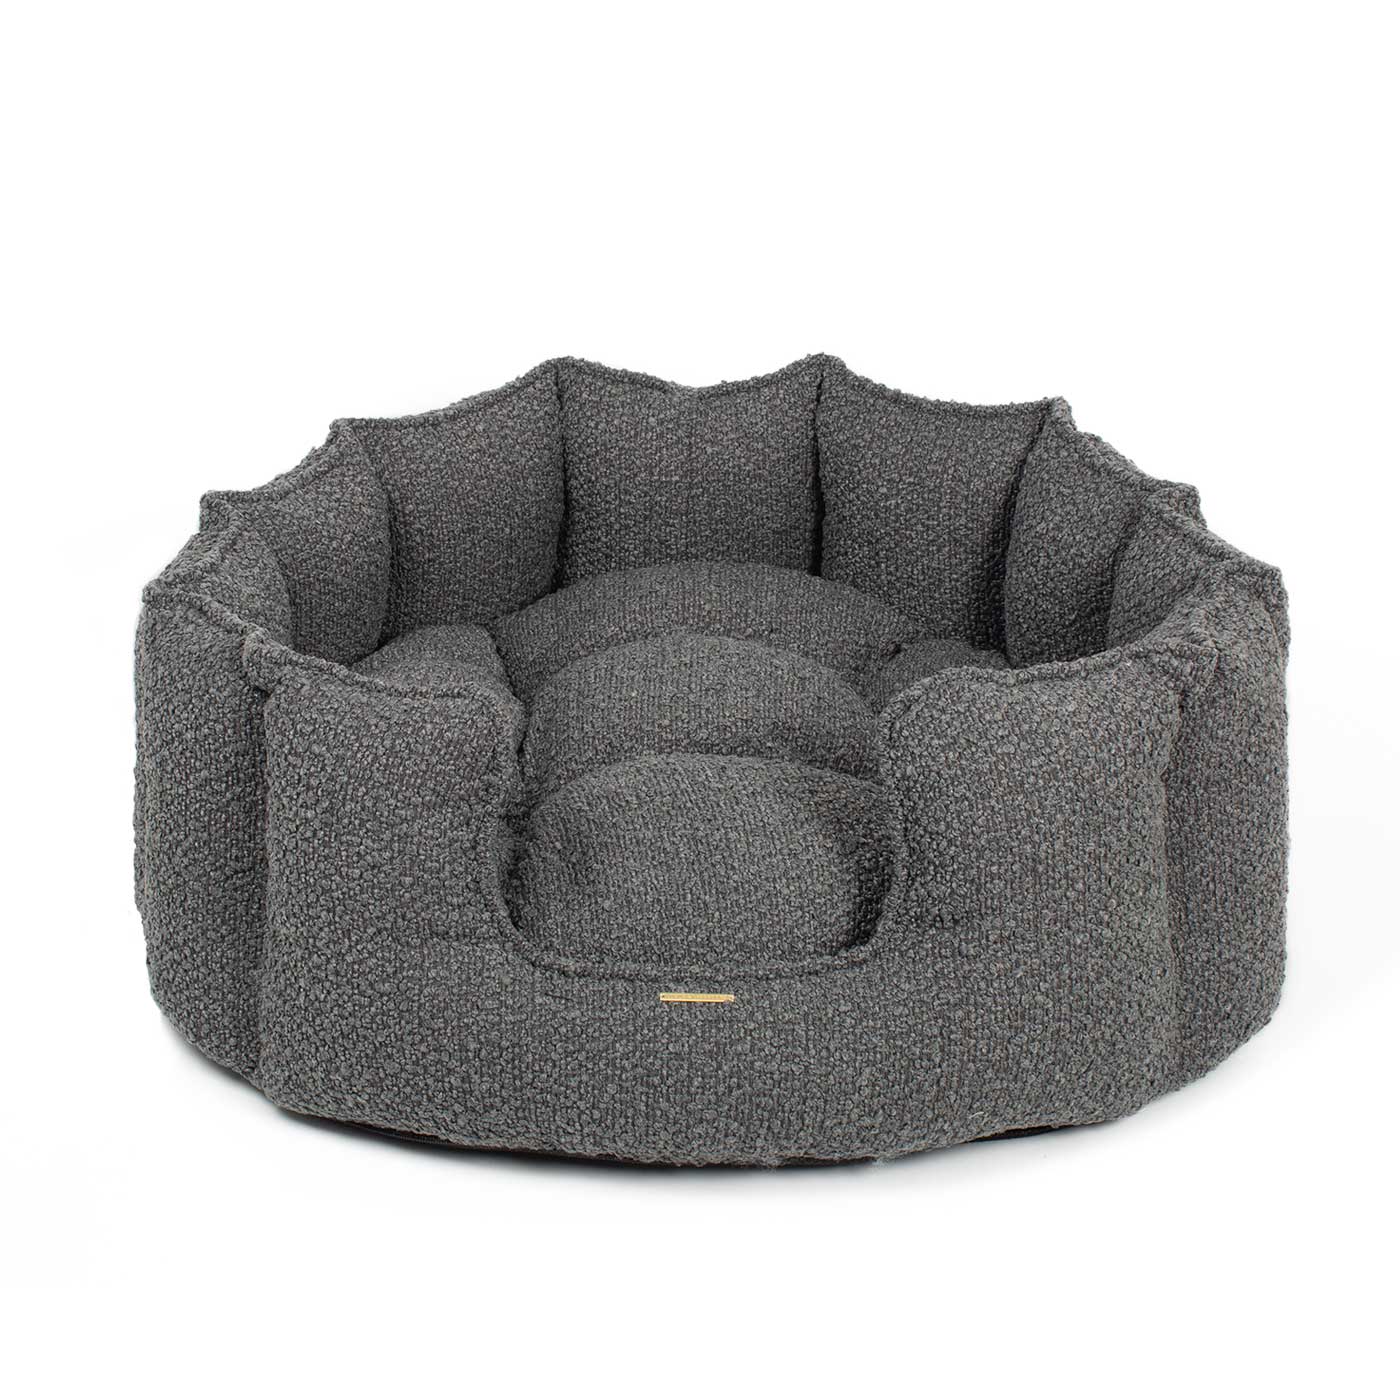 [color:granite boucle] Discover Our Luxurious High Wall Bed For Cats & Kittens, Featuring inner pillow with plush teddy fleece on one side To Craft The Perfect Cat Bed In Stunning Granite Boucle! Available To Personalize Now at Lords & Labradors US